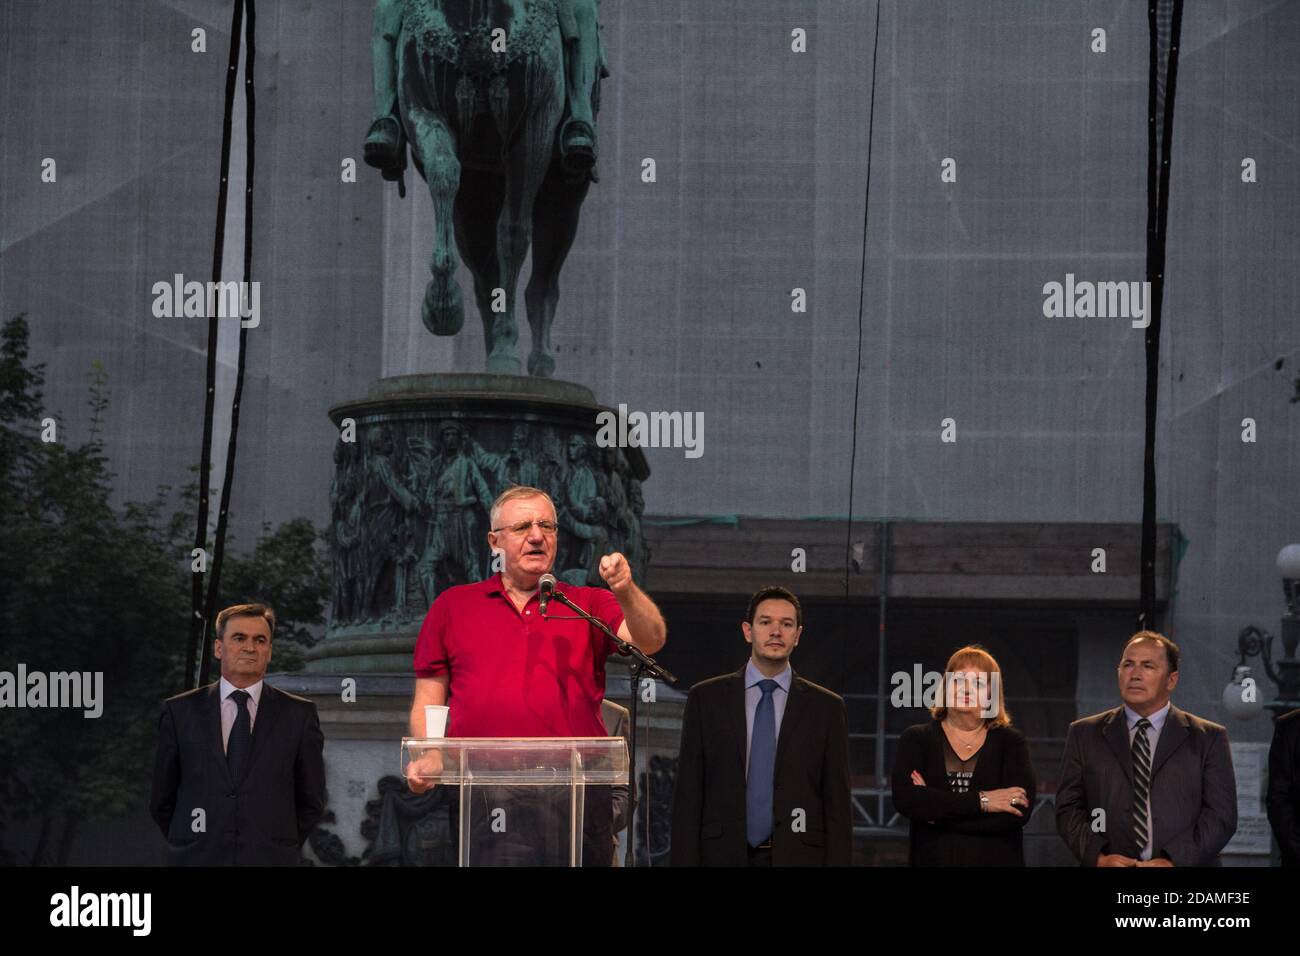 BELGRADE, SERBIA - JUNE 28, 2015: President of the Serbian Radical Party Vojislav Seselj gives a speech on Republic Square for Vidovdan Day.   Picture Stock Photo